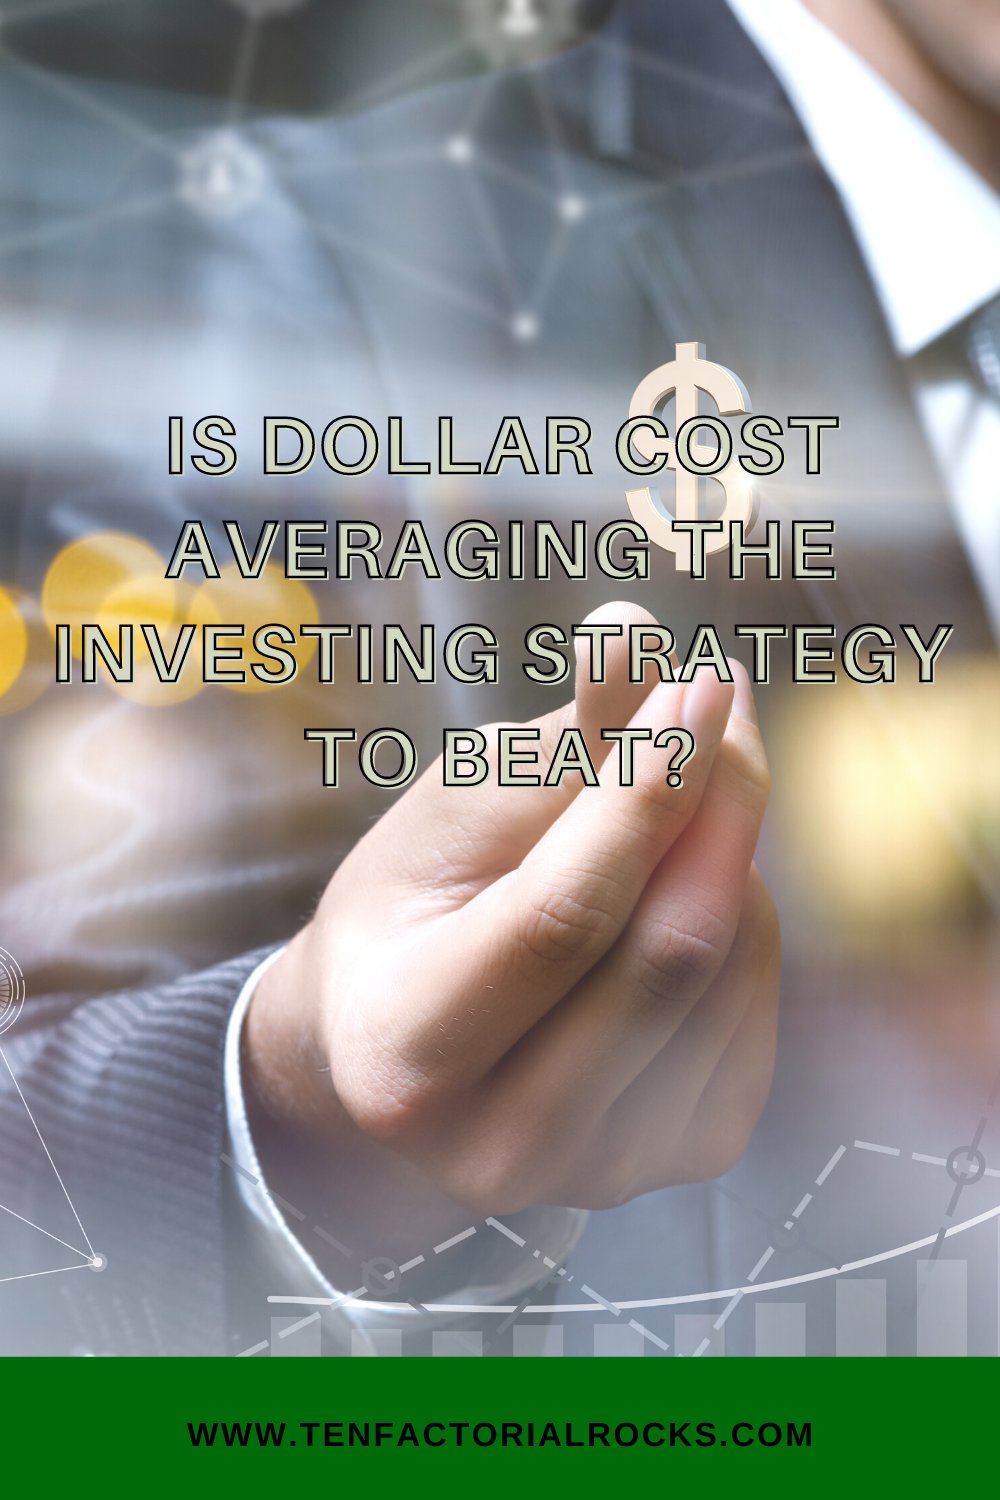 Is Dollar Cost Averaging the Investing Strategy to Beat